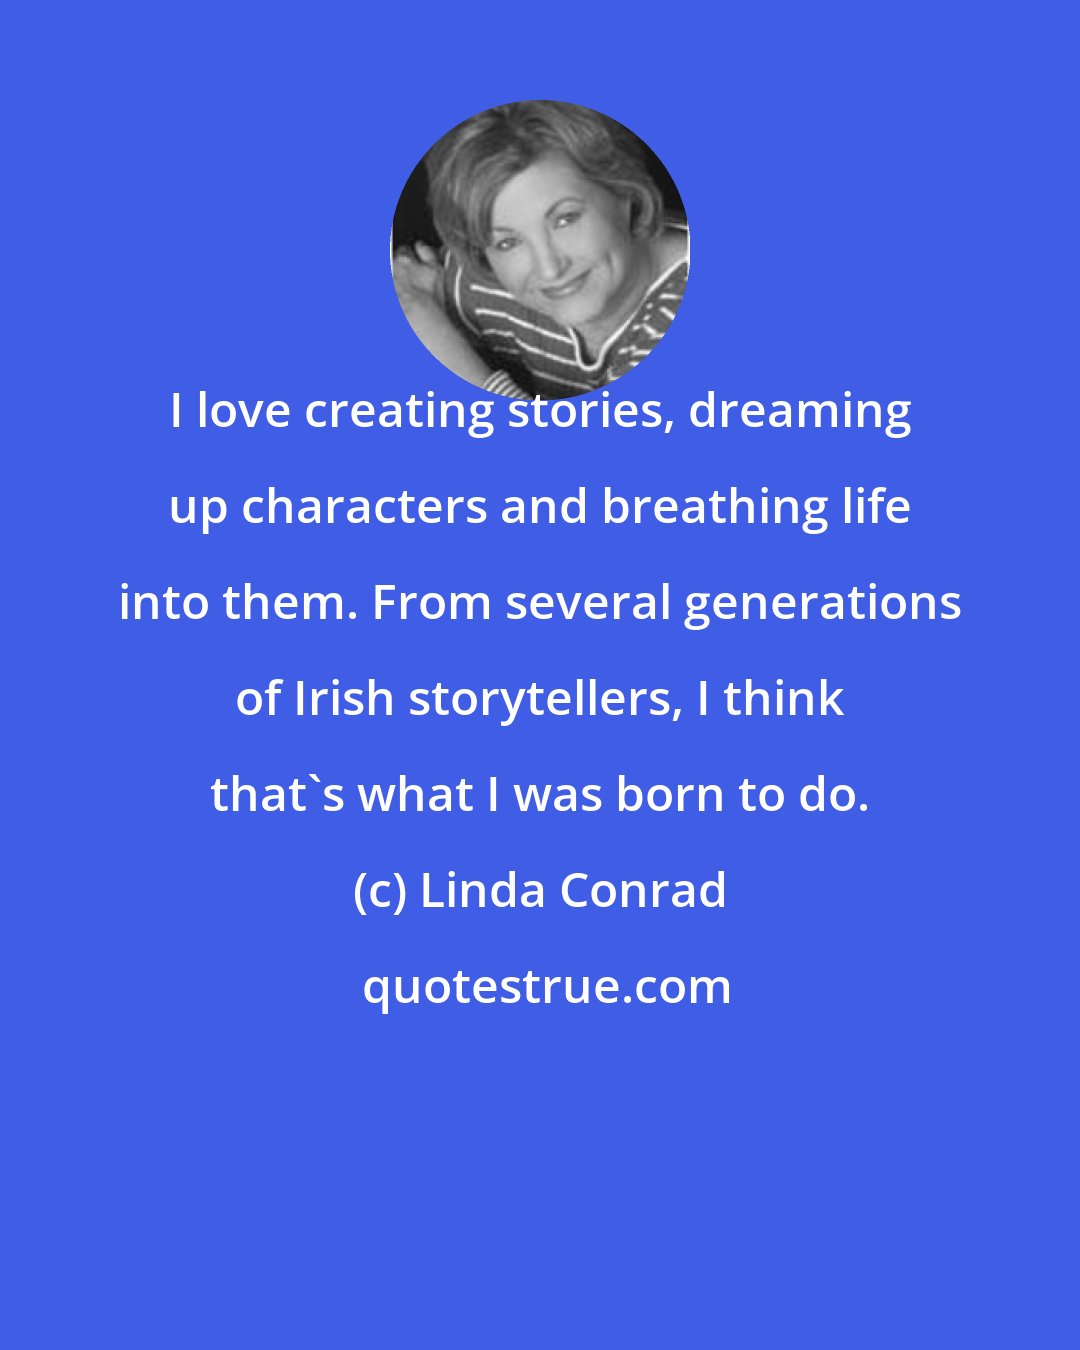 Linda Conrad: I love creating stories, dreaming up characters and breathing life into them. From several generations of Irish storytellers, I think that's what I was born to do.